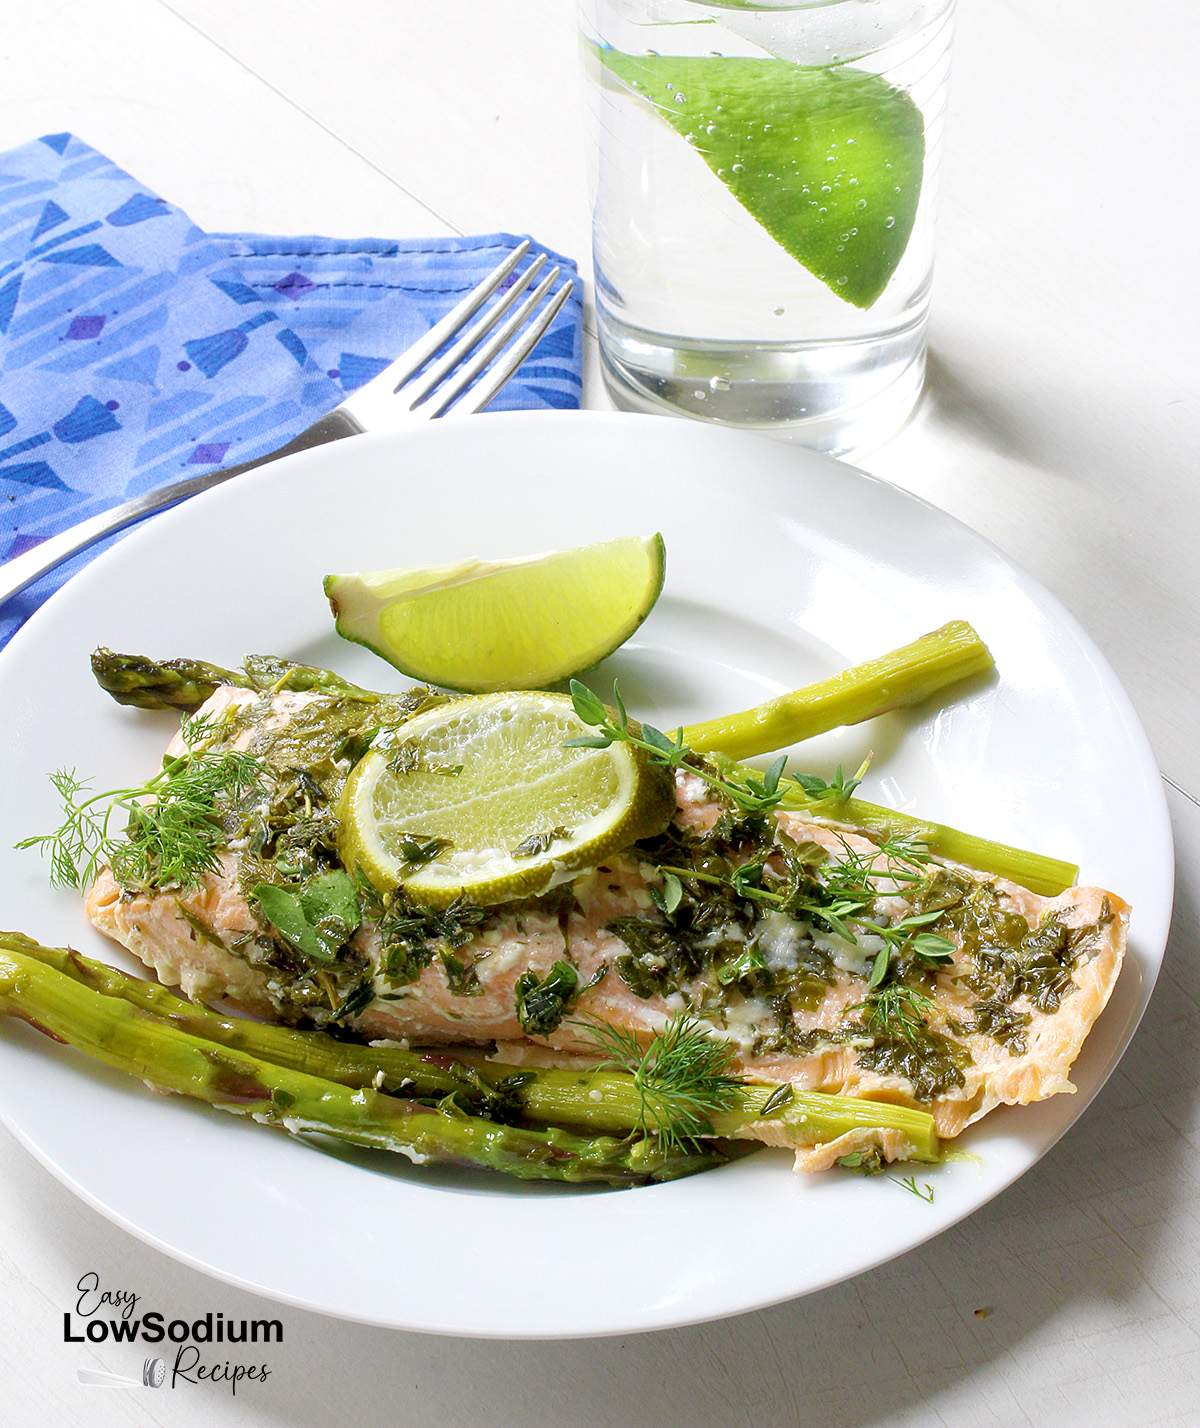 Recipe for low sodium lime and herb salmon packets